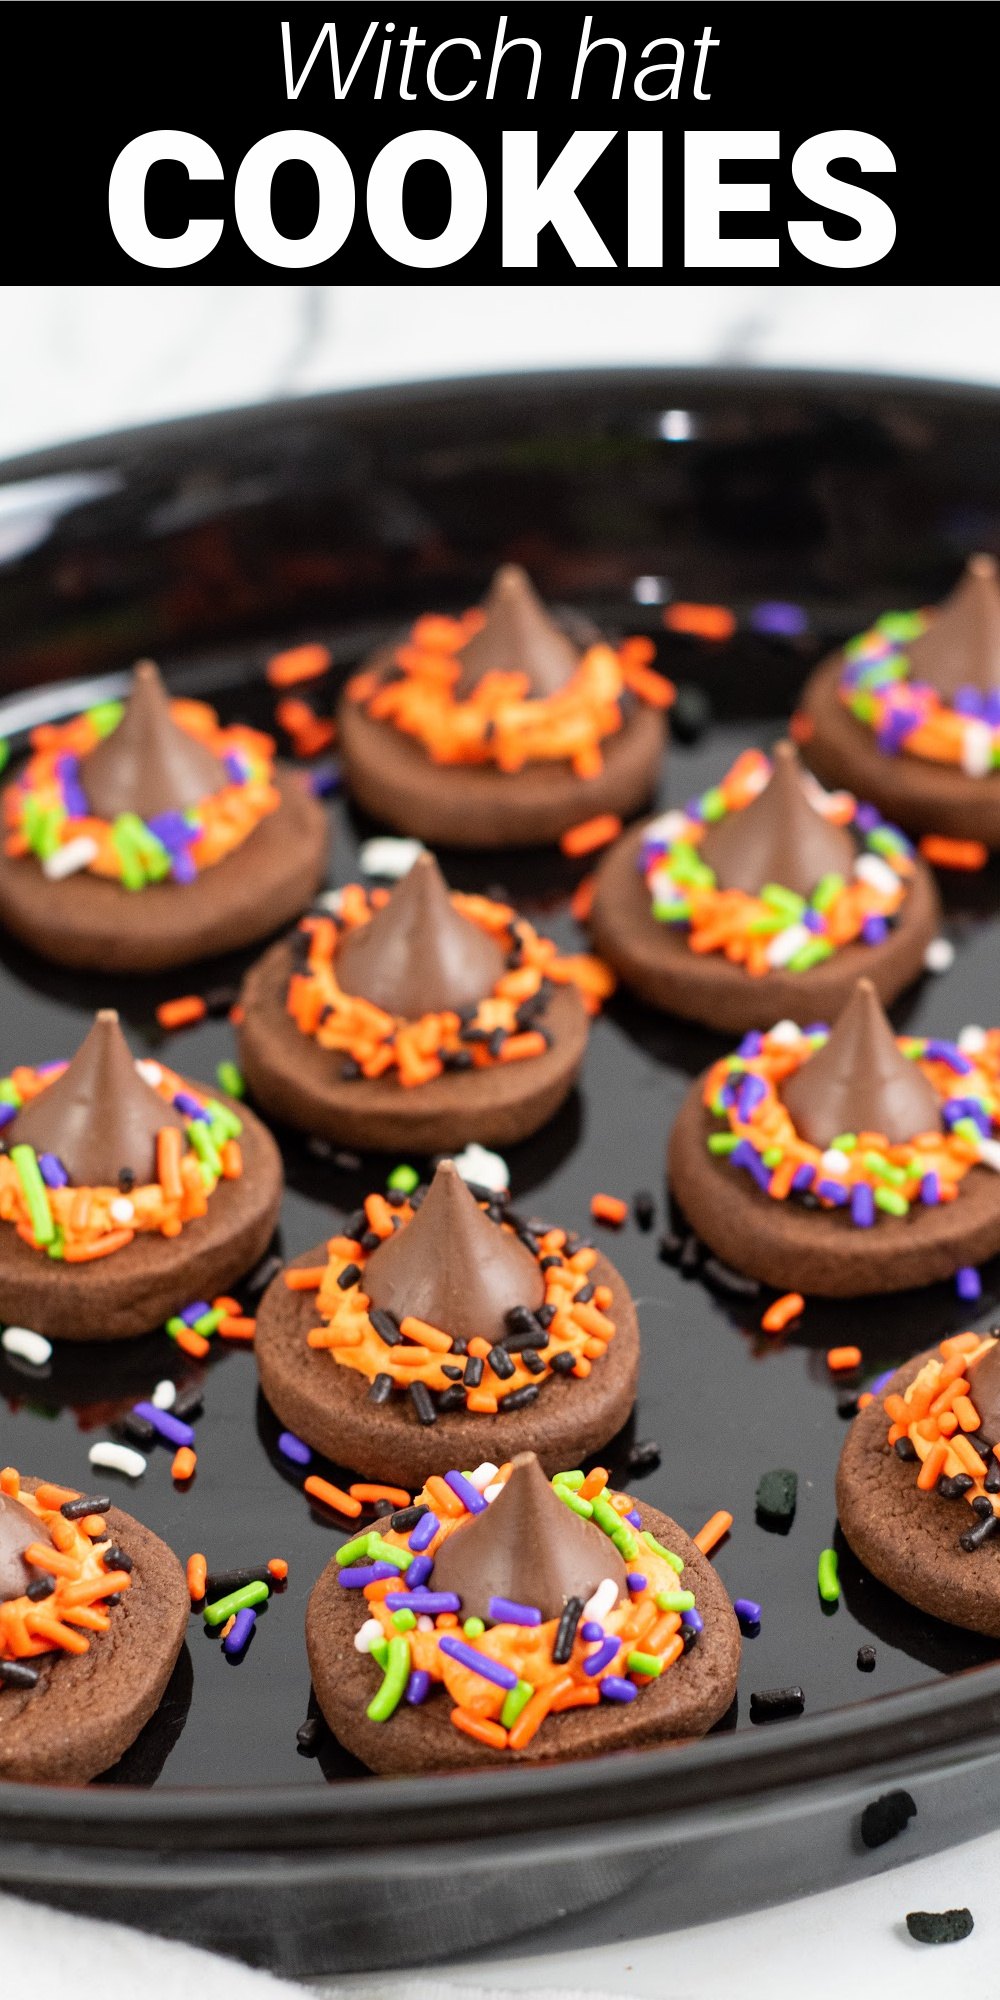 Witch hat cookies are a simple and fun treat that's perfect for Halloween. The base is a chocolate cookie topped with a creamy homemade buttercream frosting and a Hershey's kiss. 